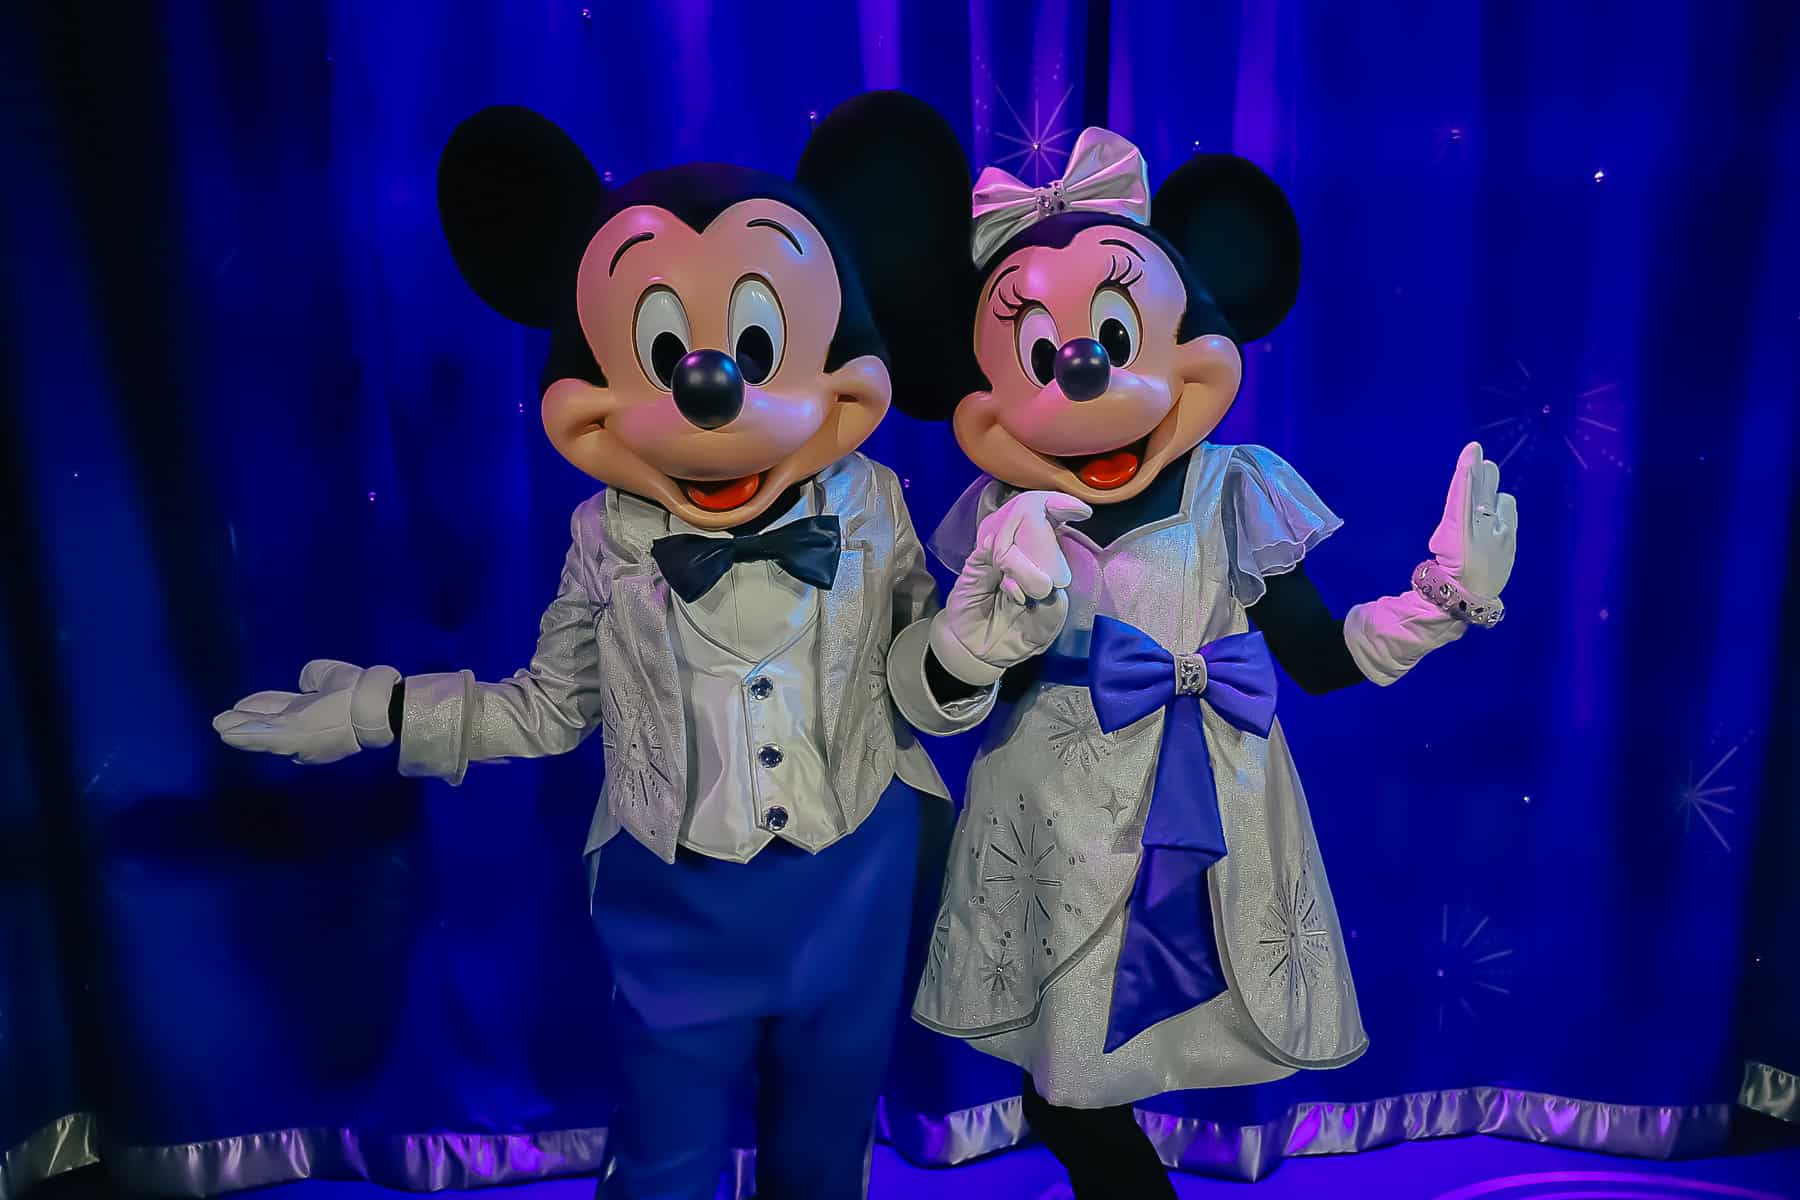 Meet Mickey and Minnie in Their Disney100 Outfits at Epcot (Limited-Time Opportunity)